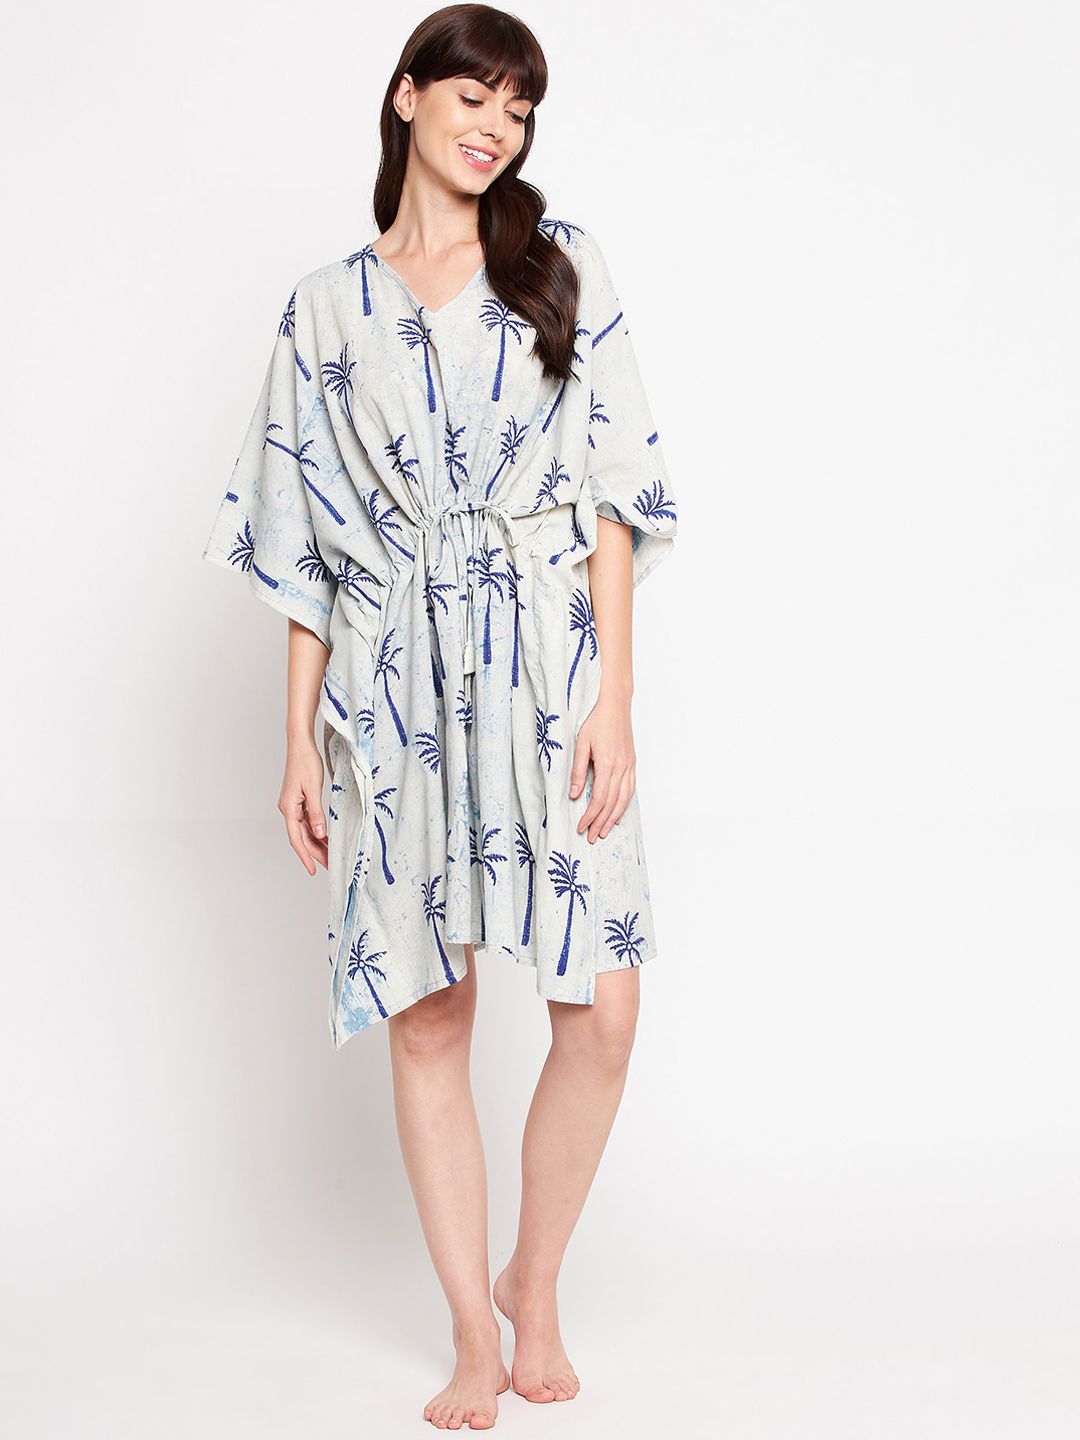 SECRETS BY ZEROKAATA Women Light-Grey & Blue Printed Pure Cotton Kaftan Cover Up Dress Price in India